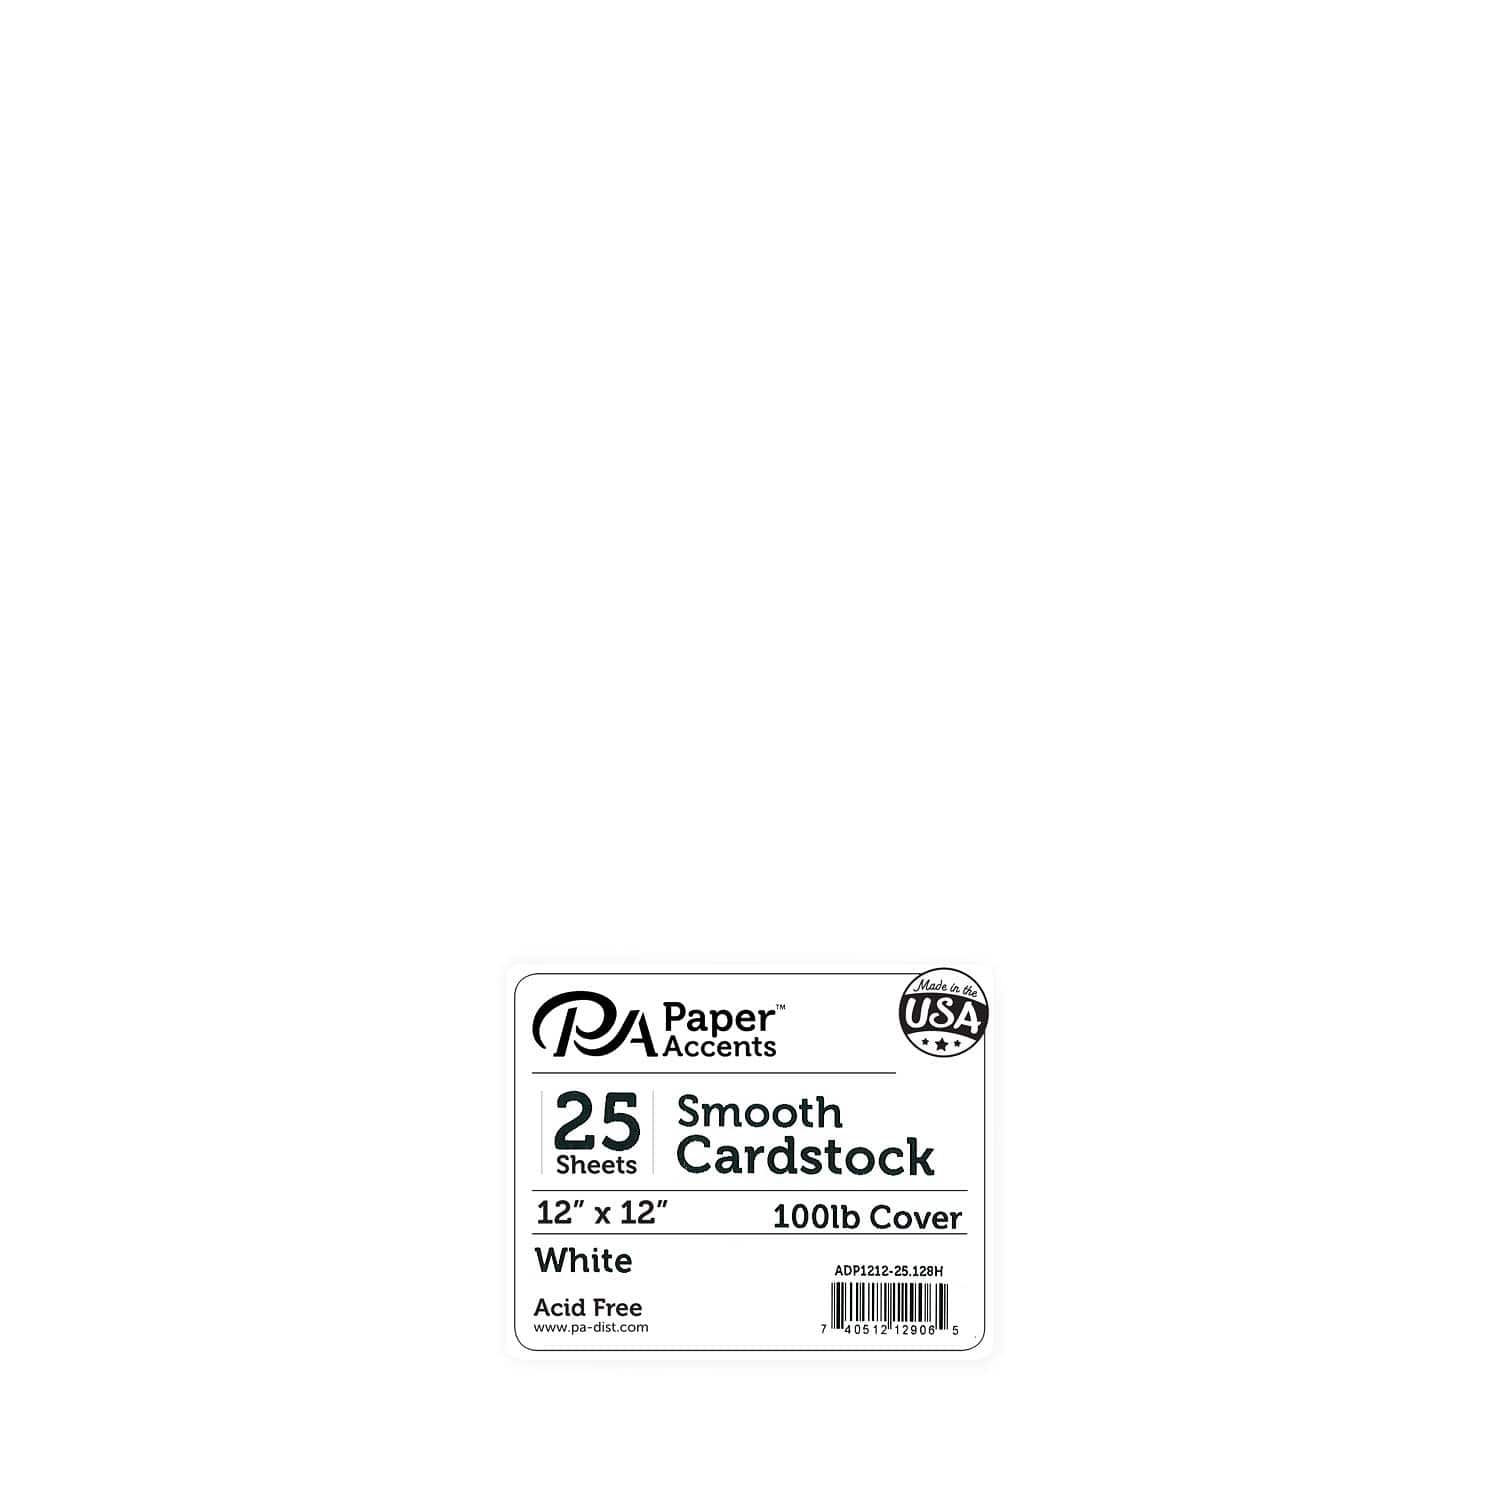 PA Paper™ Accents Pearlized 12 x 12 111lb. Cardstock, 25 Sheets